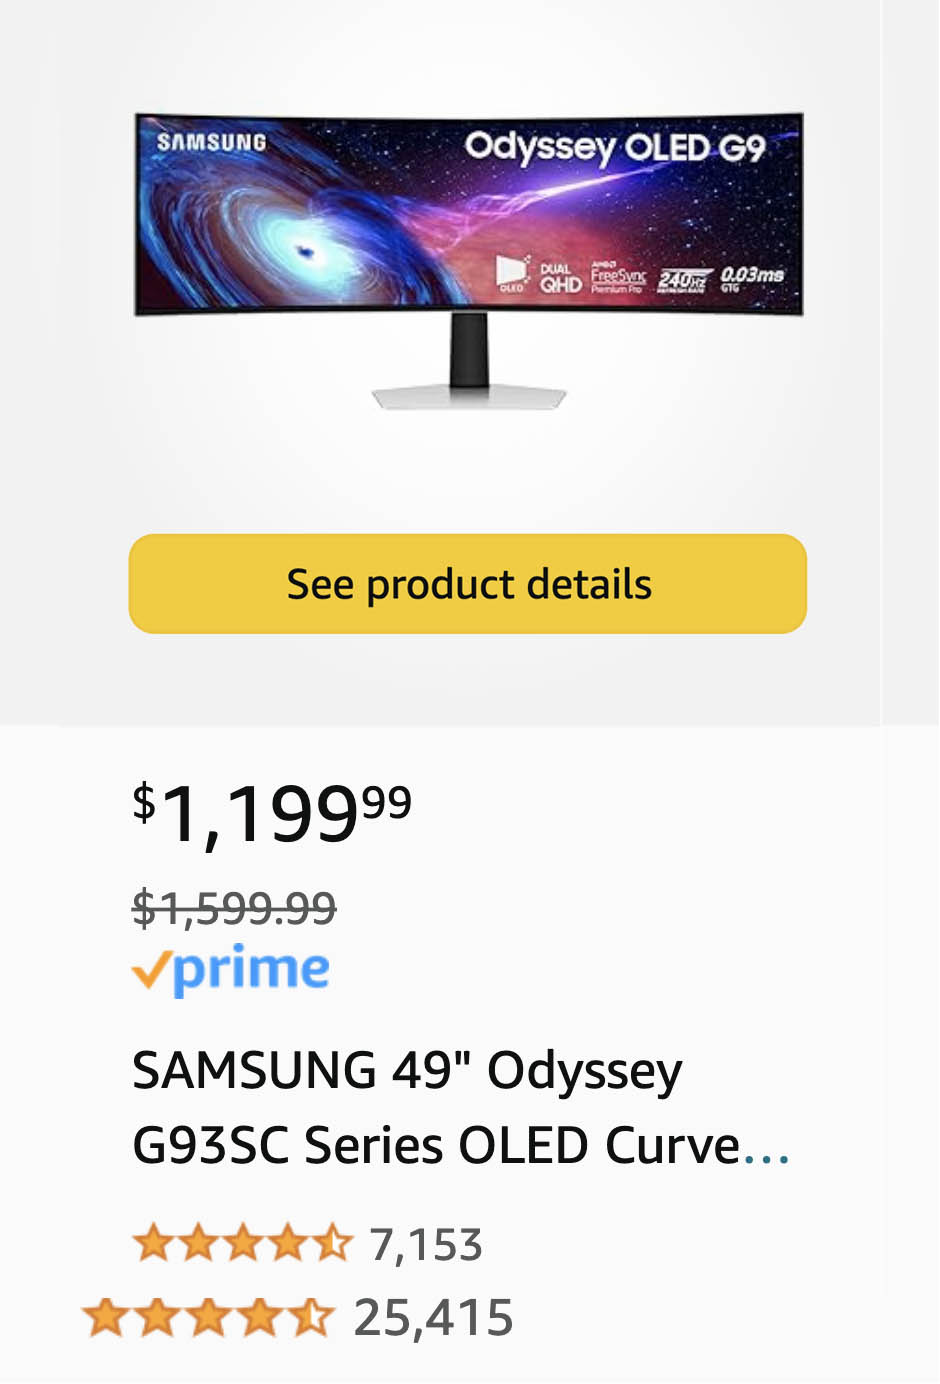 Samsung Curved Gaming Monitor Deal